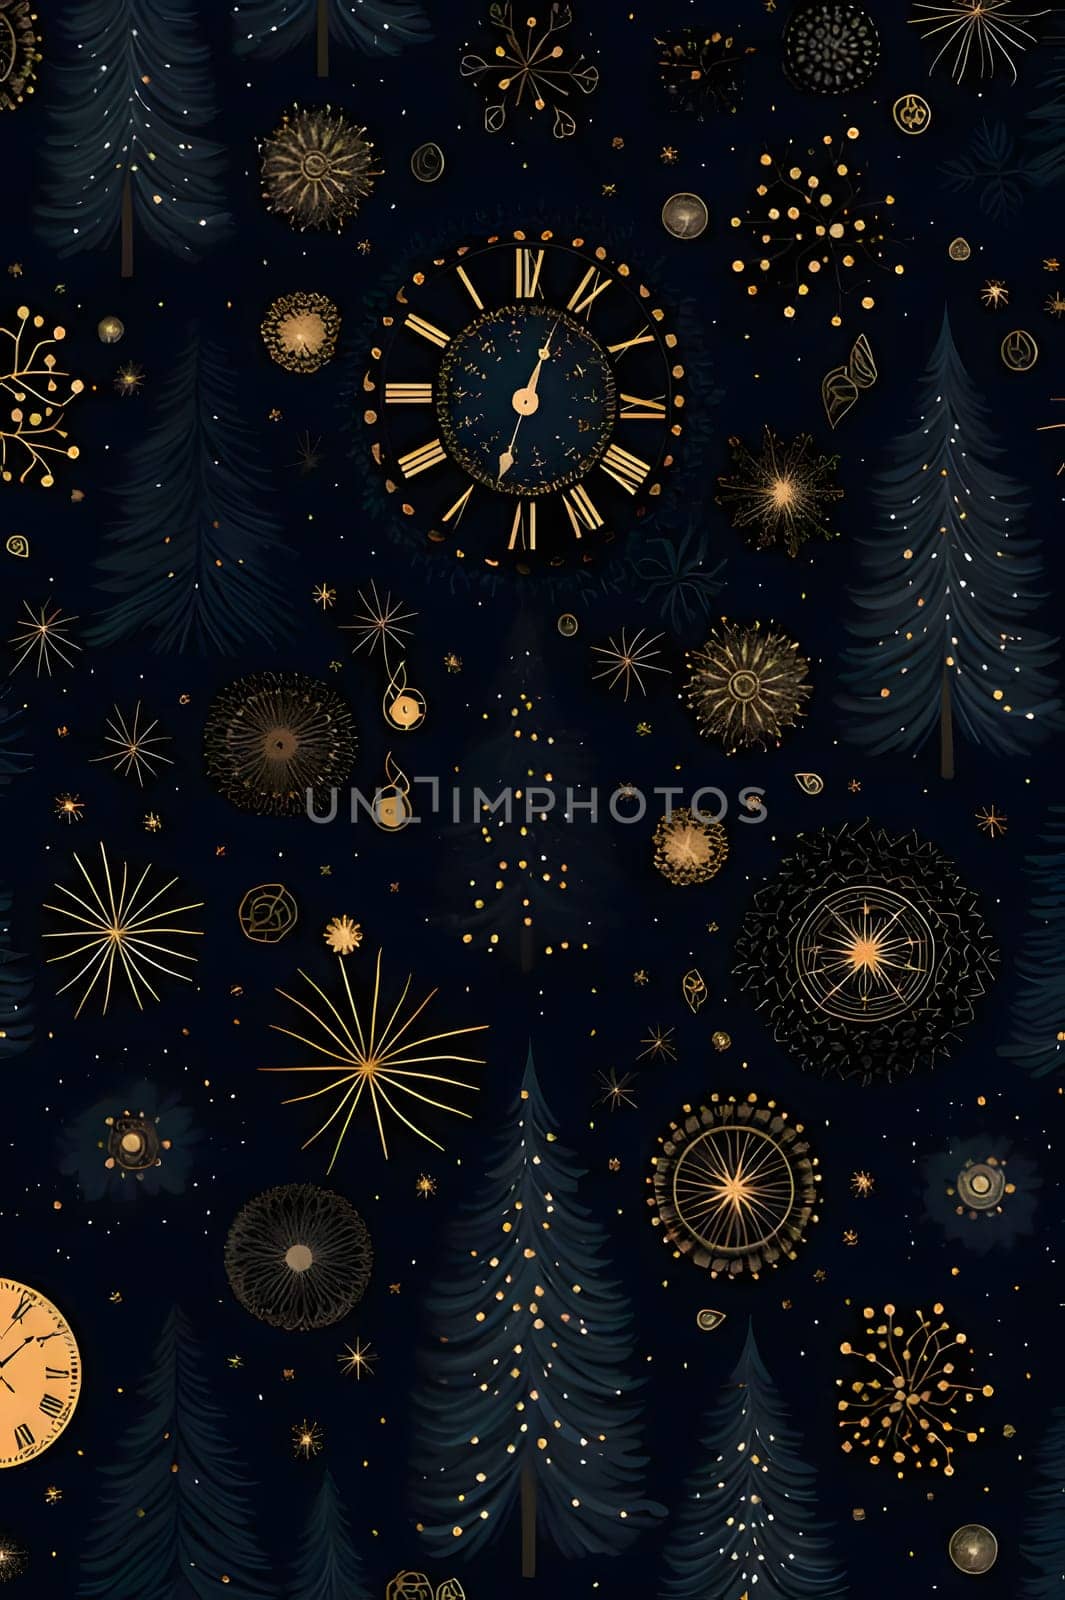 Elegant and modern. Clock faces and Christmas tree plants. as abstract background, wallpaper, banner, texture design with pattern - vector. Dark colors.